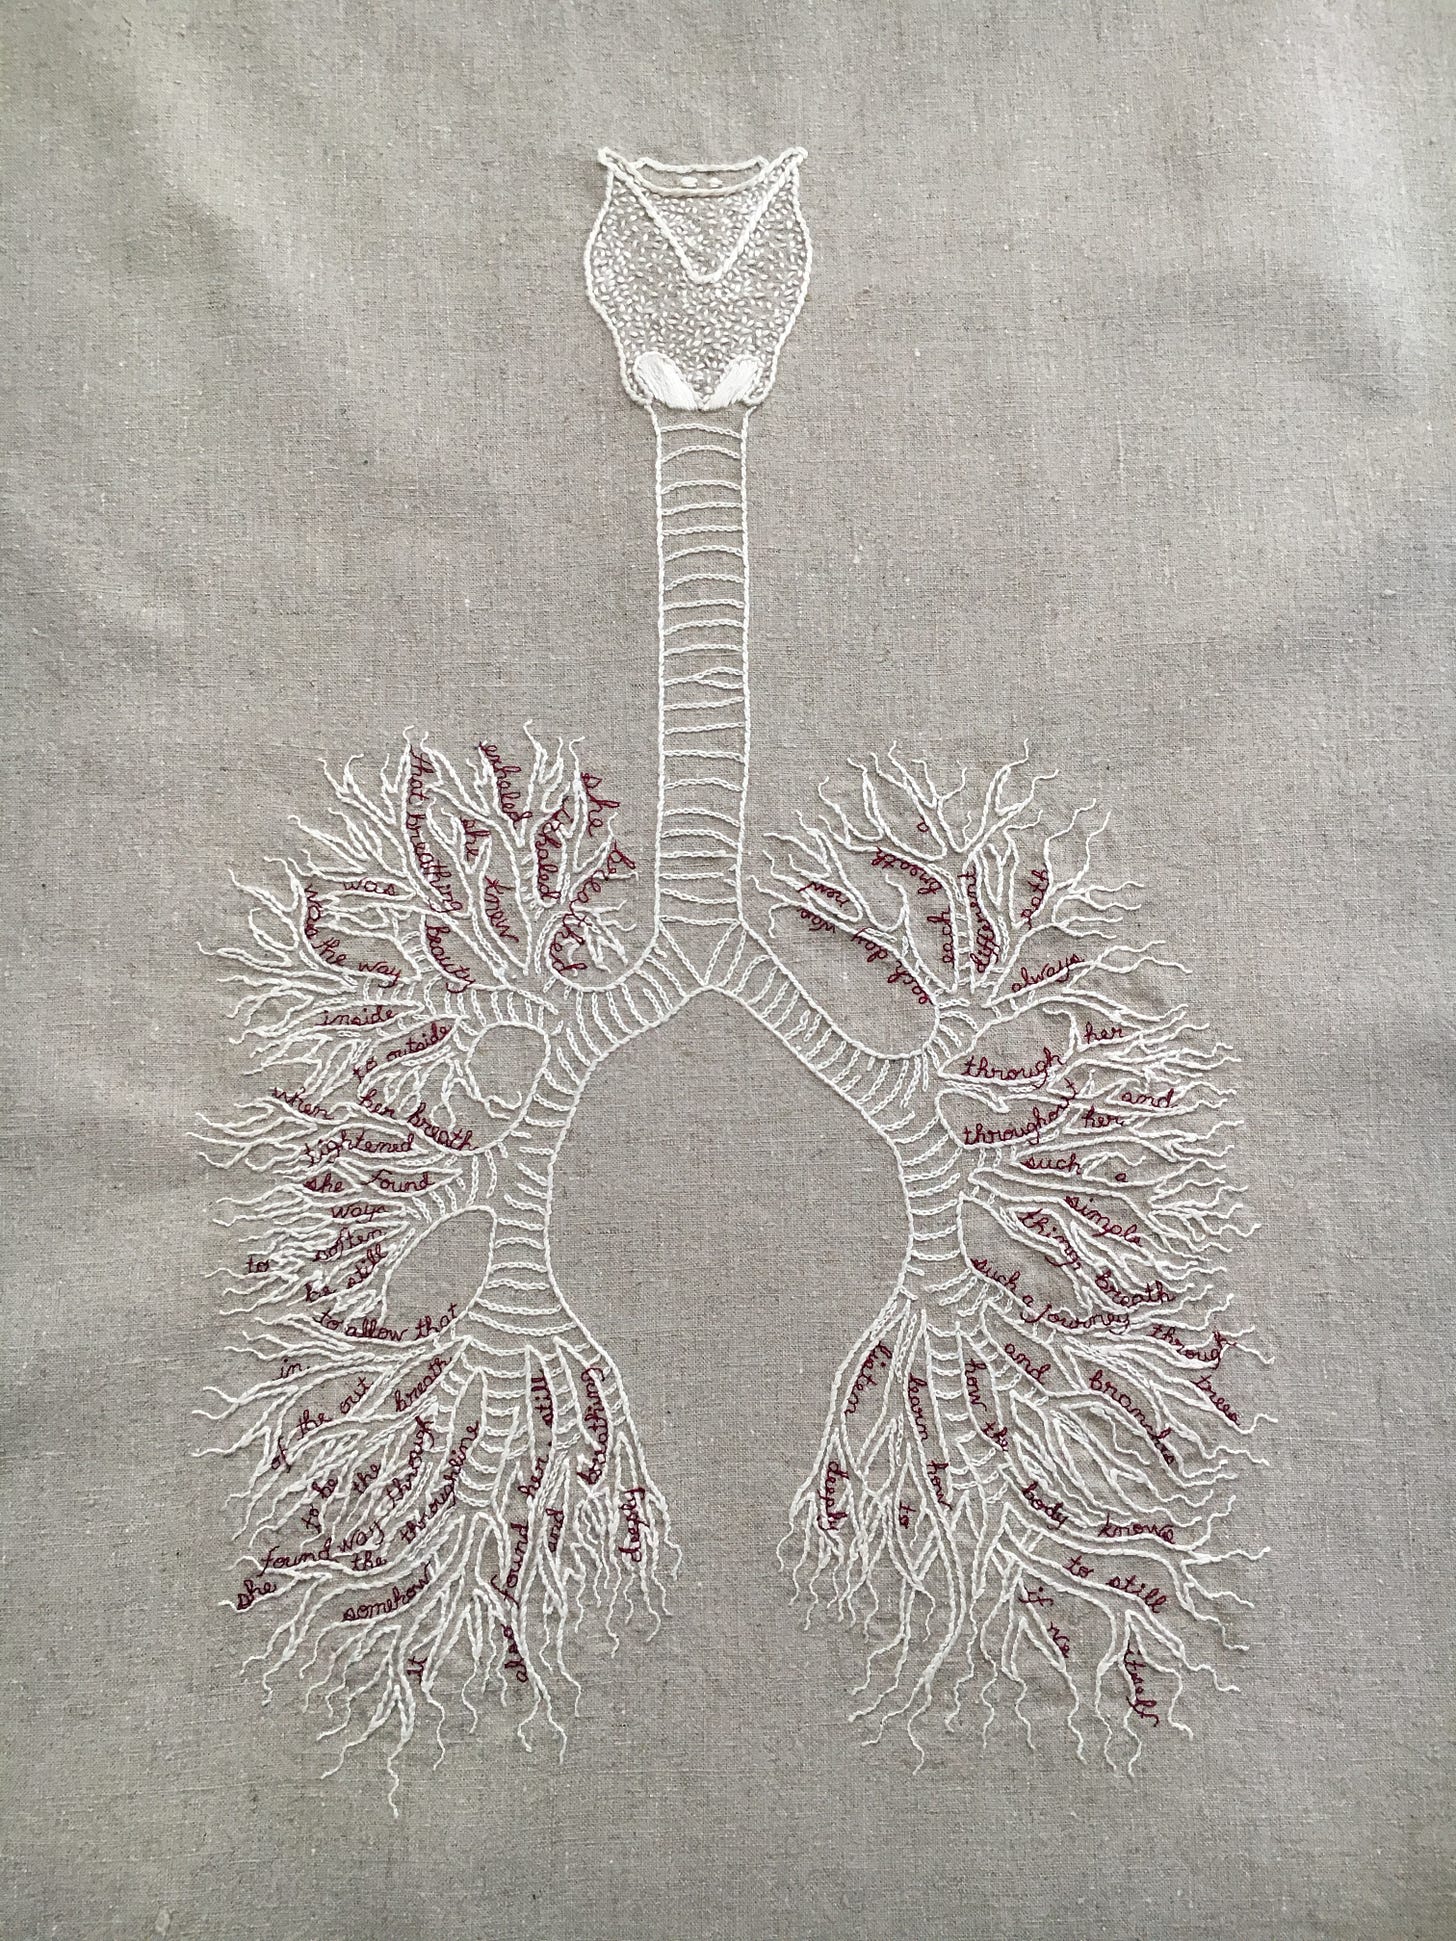 An embroidery on a pale natural linen. There is a bone white diagram of a vocal apparatus, trachea, and bronchi/lungs. In between the branches of the bronchioles are small words embroidered in cursive in thin burgundy thread. They read: she breathed. Inhaled. exhaled. she knew. that breathing. was beauty. was the way. inside. to outside. when her breath. tightened. she found. ways. to soften. be still. to allow that. in. of the out. breath. to be. the. way through. she found the throughline. somehow. it. also found her. still. and   breathing. deeply. each day was. new. each breath. a. different. path. always. through her. and. throughout her. such a. simple. thing, breath. such a journey. through. trees. and. branches. how the body knows. to still. itself. if we learn how. to. listen deeply.